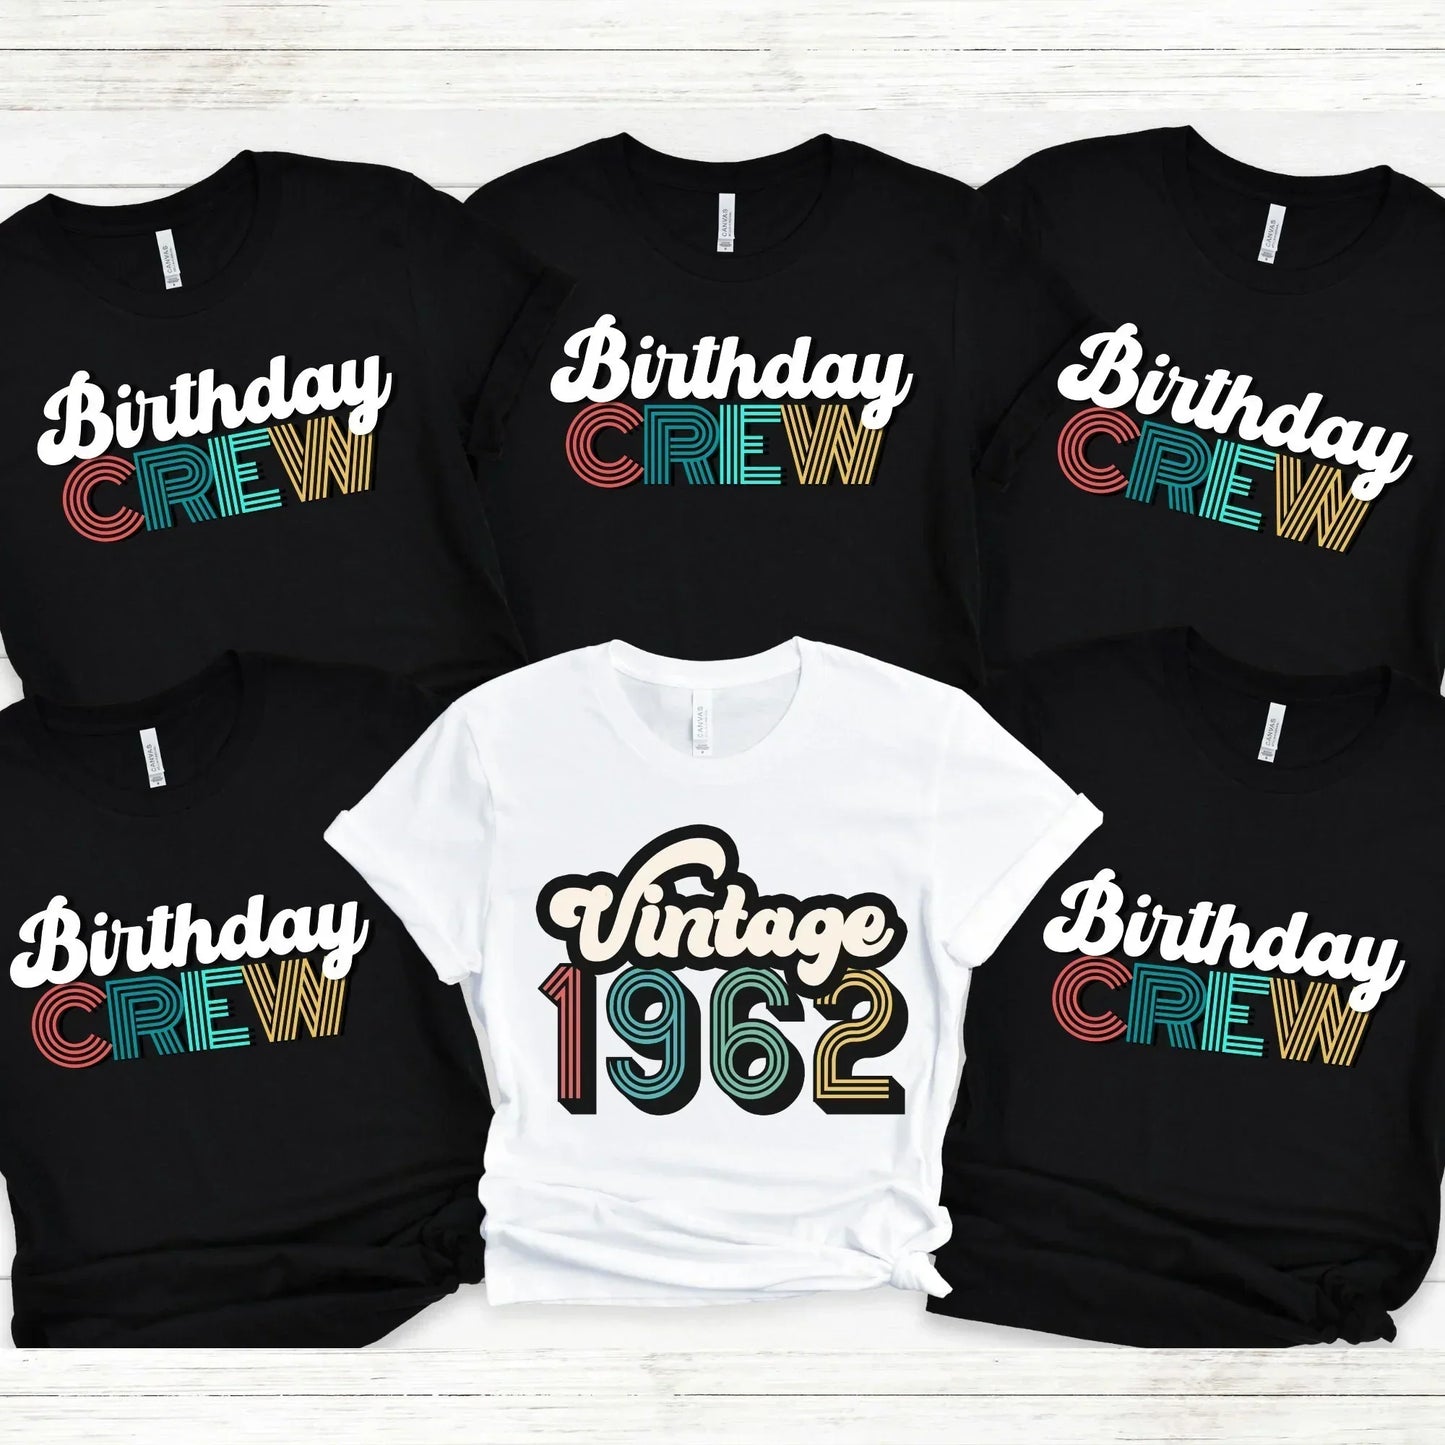 Embrace Your Wisdom and Celebrate Your 60th Birthday with Style - Get Your Premium Birthday Shirt Today! HMDesignStudioUS